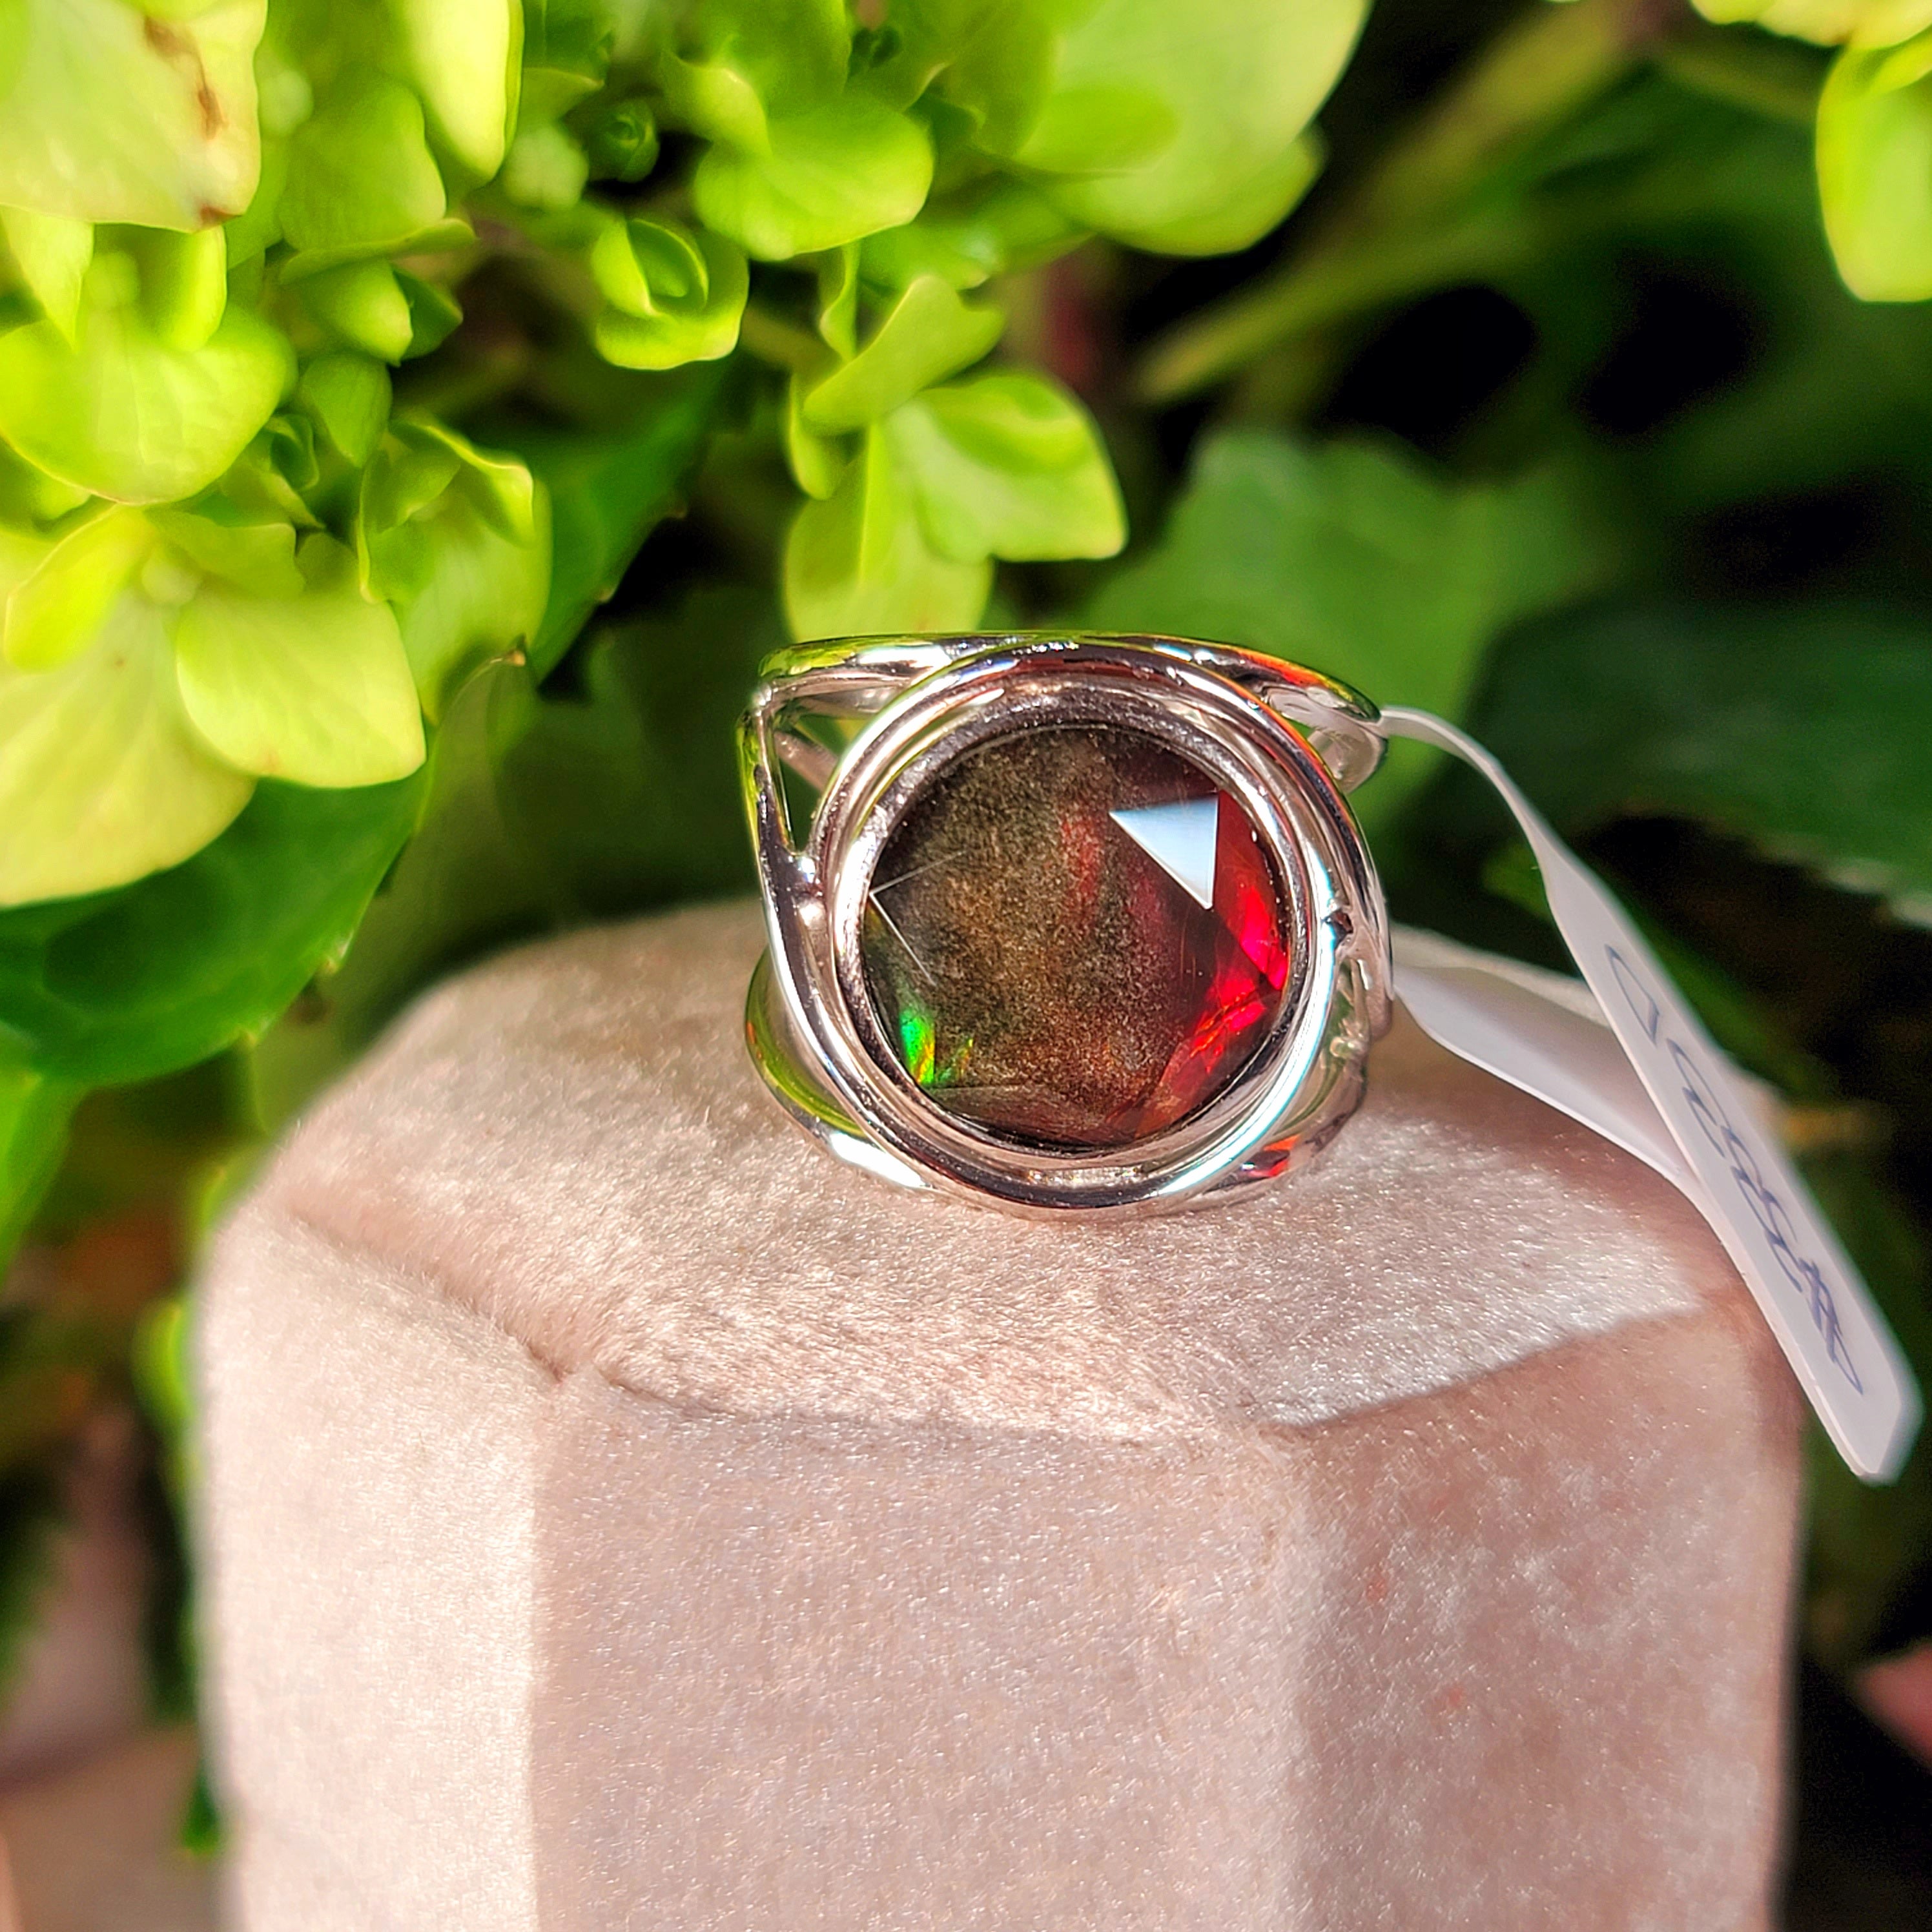 Ammolite Merkaba Finger Cuff Adjustable Ring .925 Sterling Silver for Good Luck, Prosperity and Protection